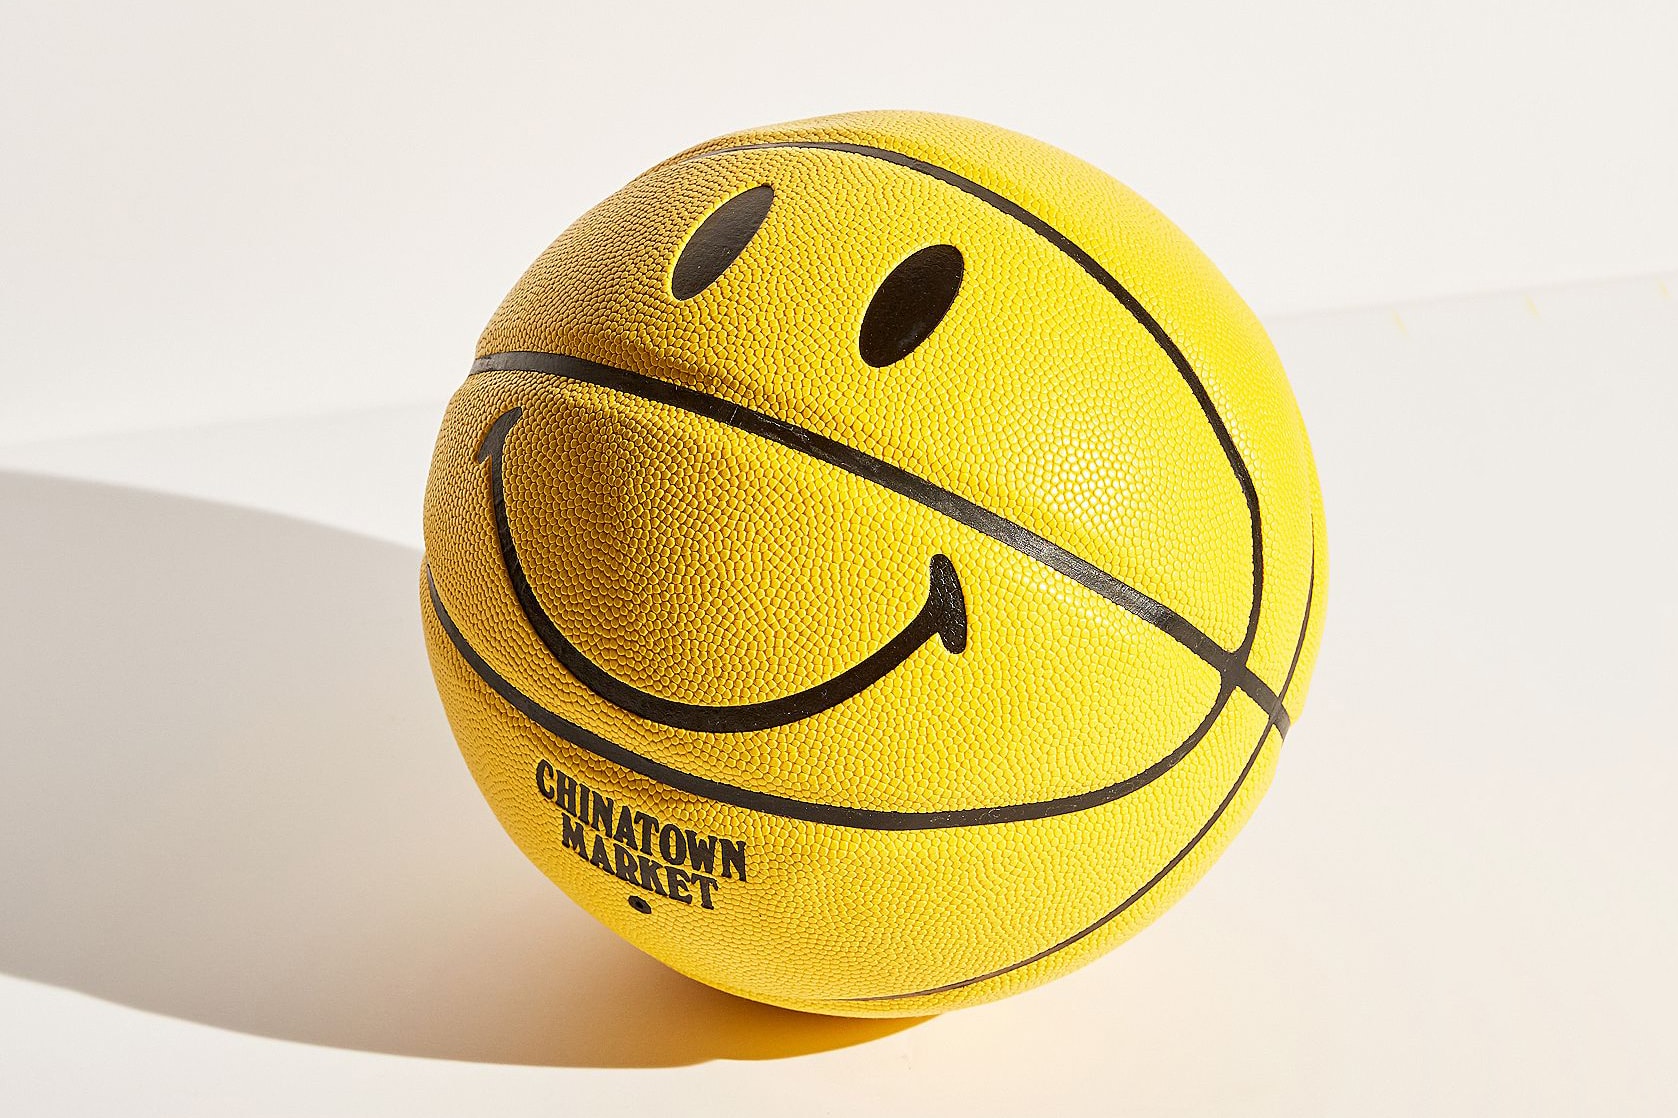 Chinatown Market for UO Smiley Face Basketball Urban outfitters Mike Cherman